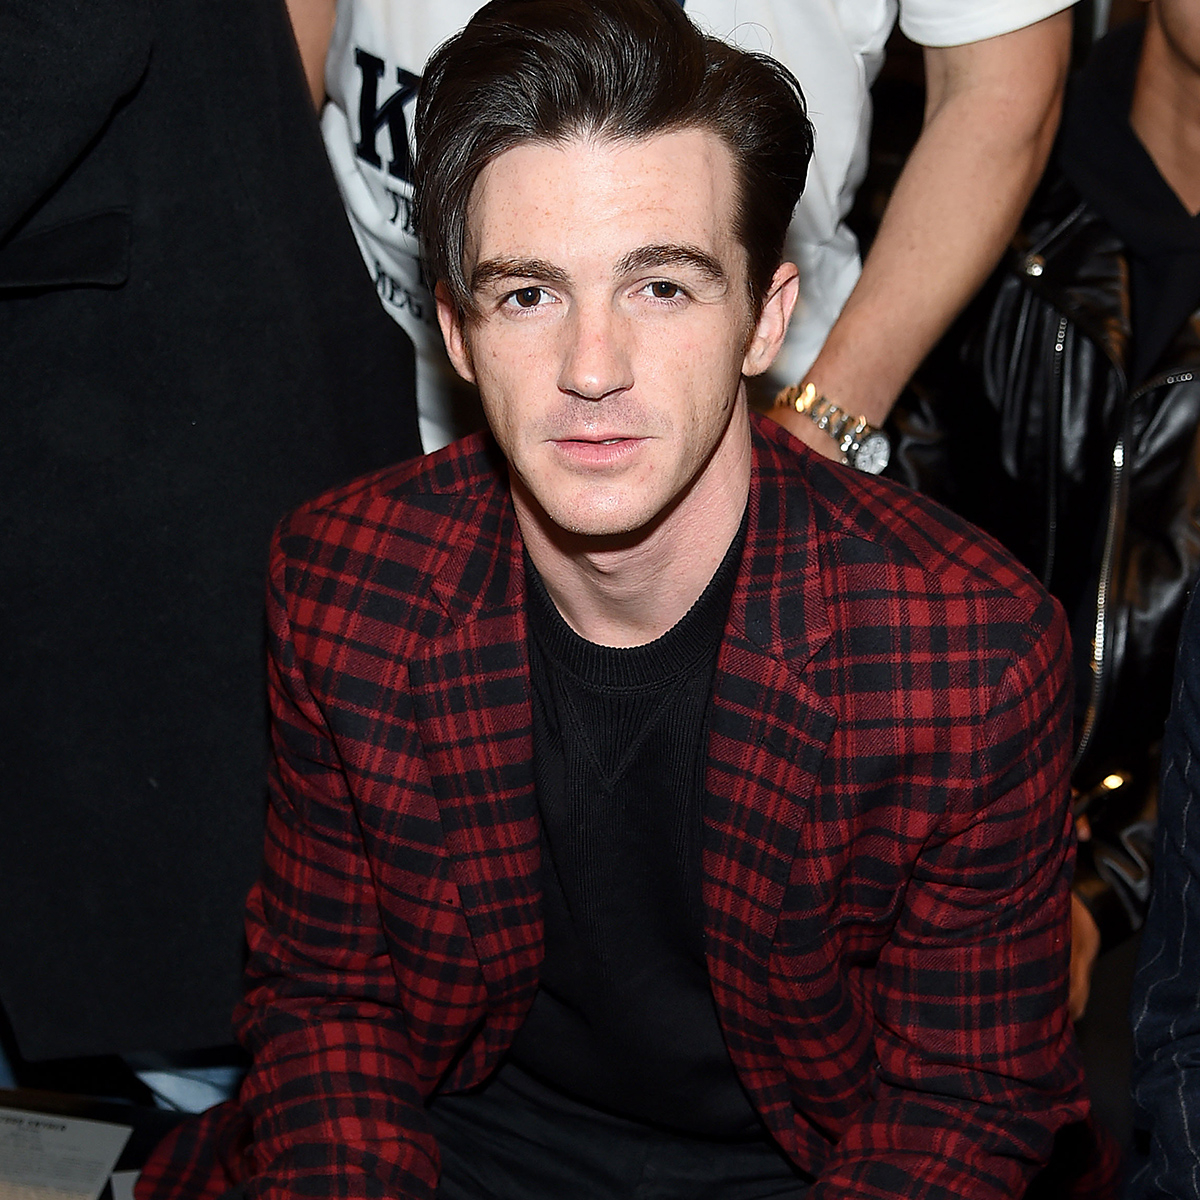 Drake Bell Details “Gruesome” Abuse Amid Quiet on Set’s Release